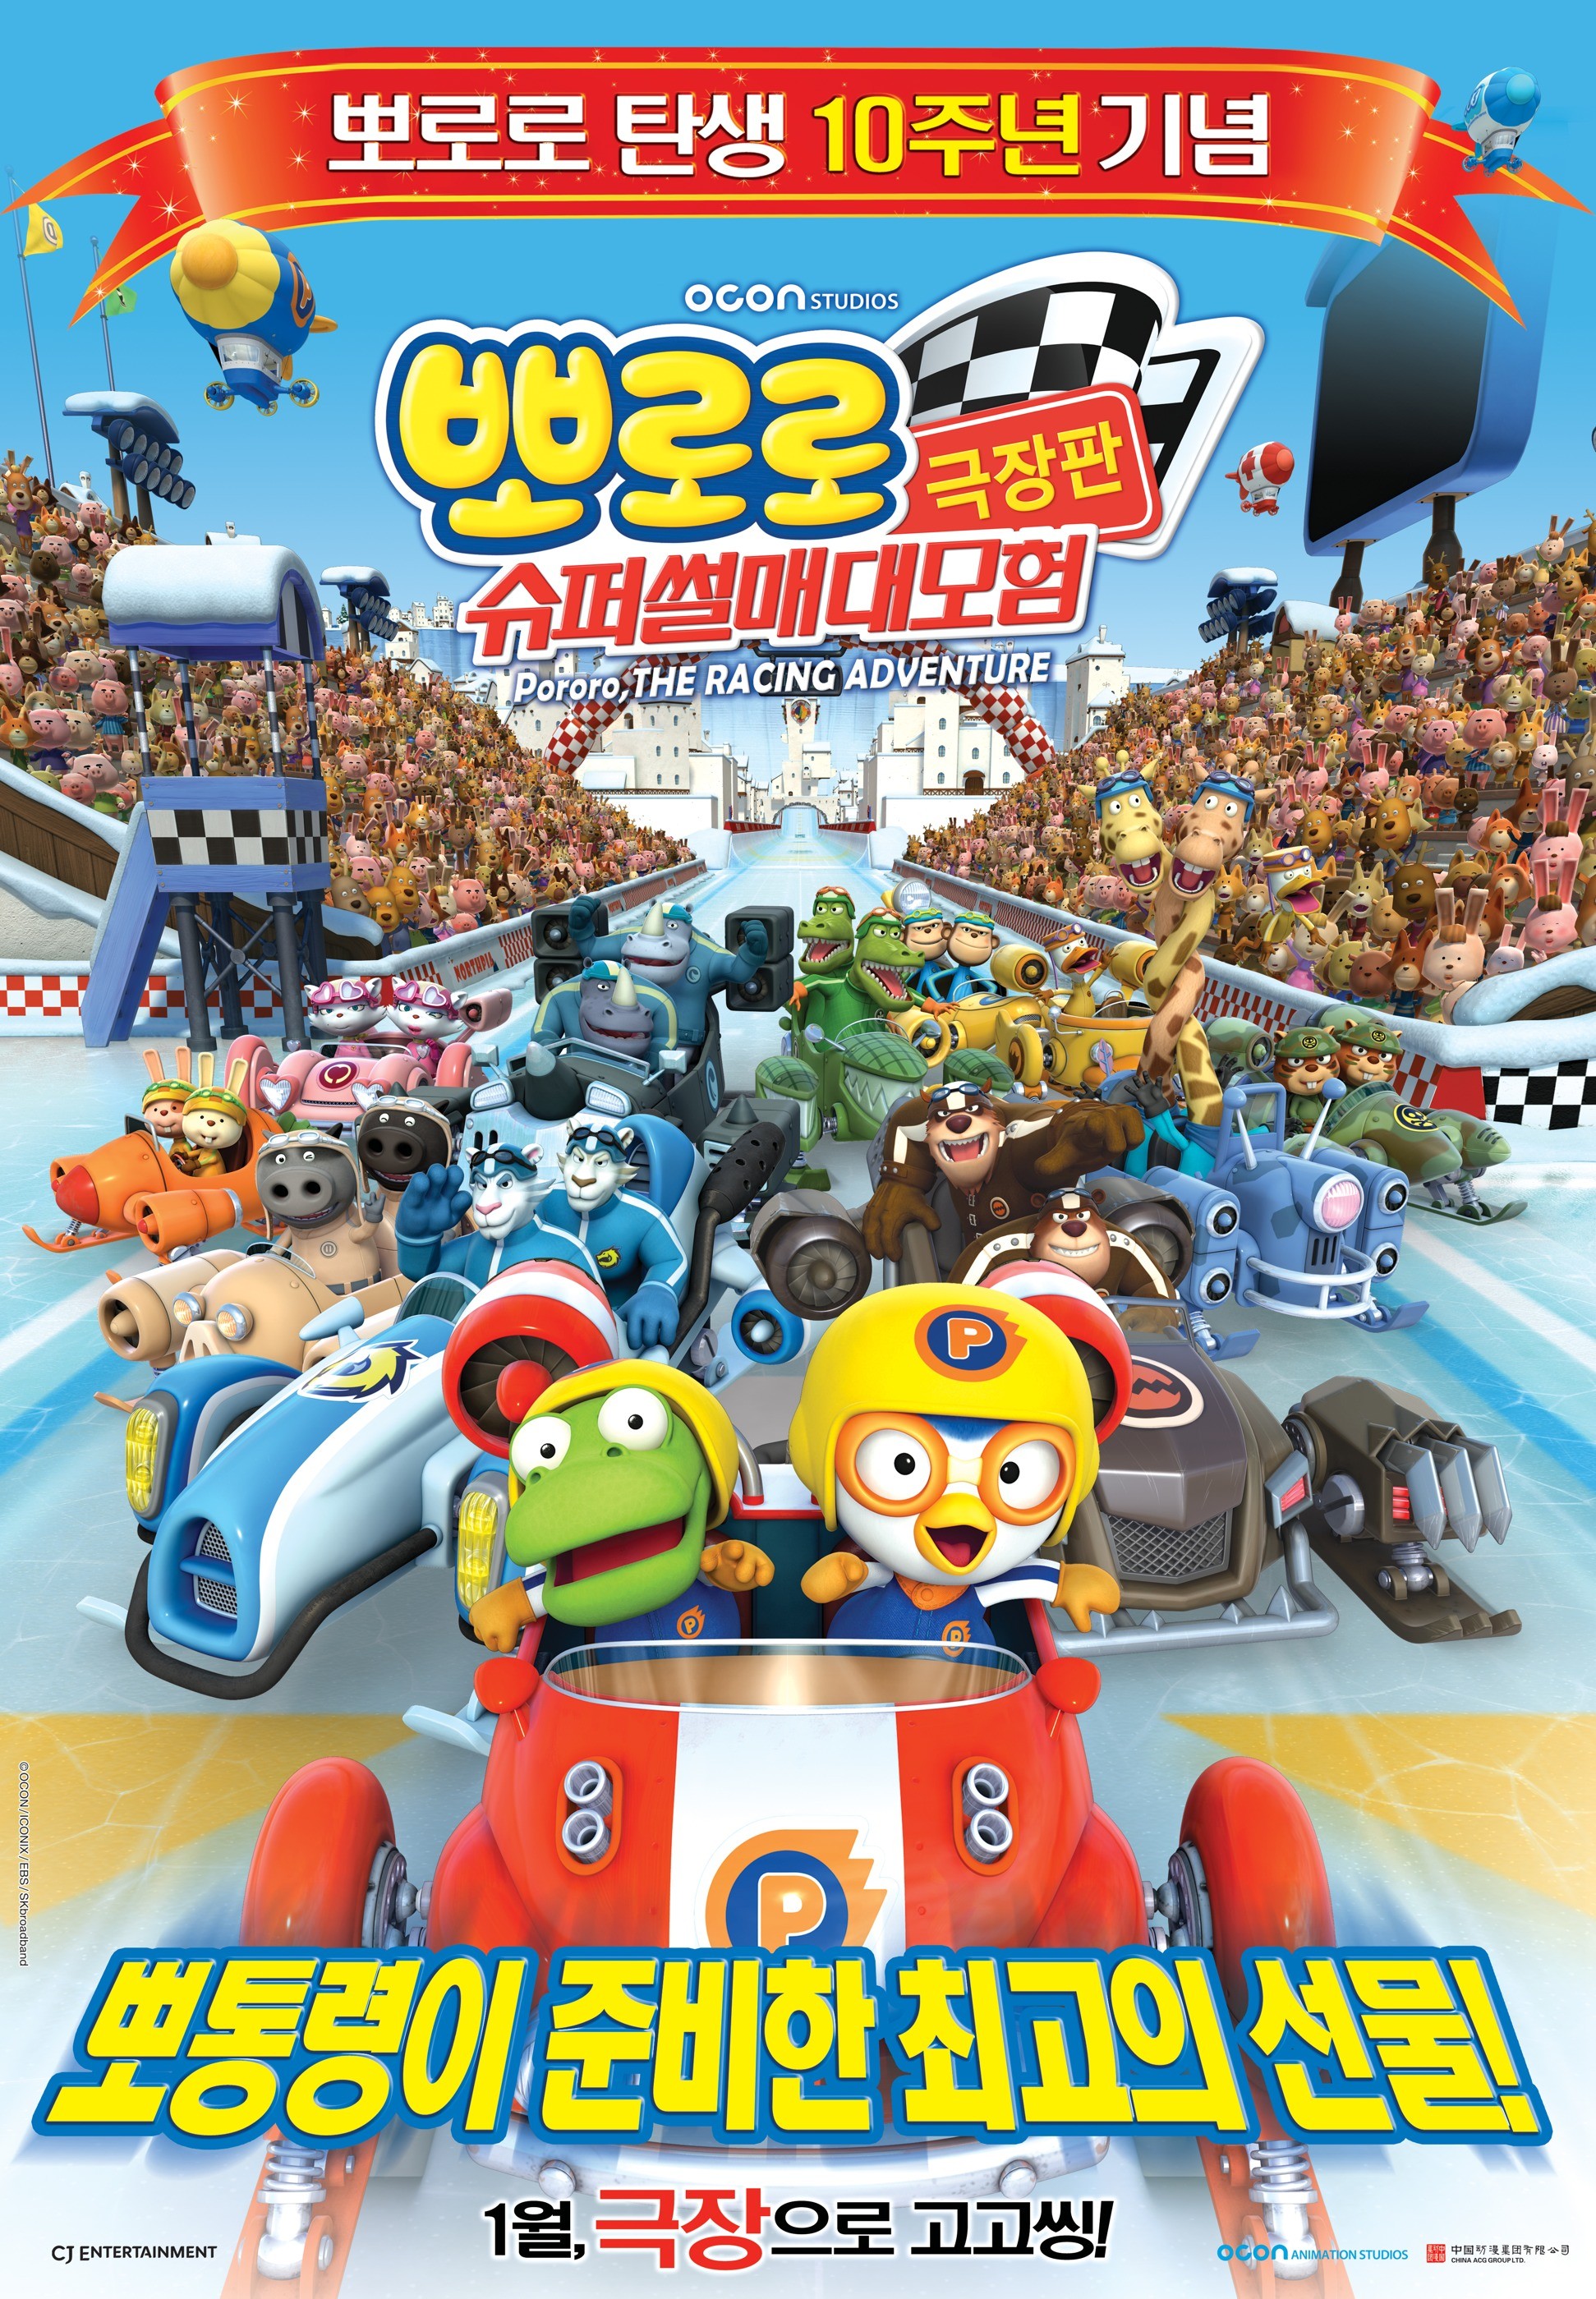 Mega Sized Movie Poster Image for Pororo, the Racing Adventure (#2 of 2)